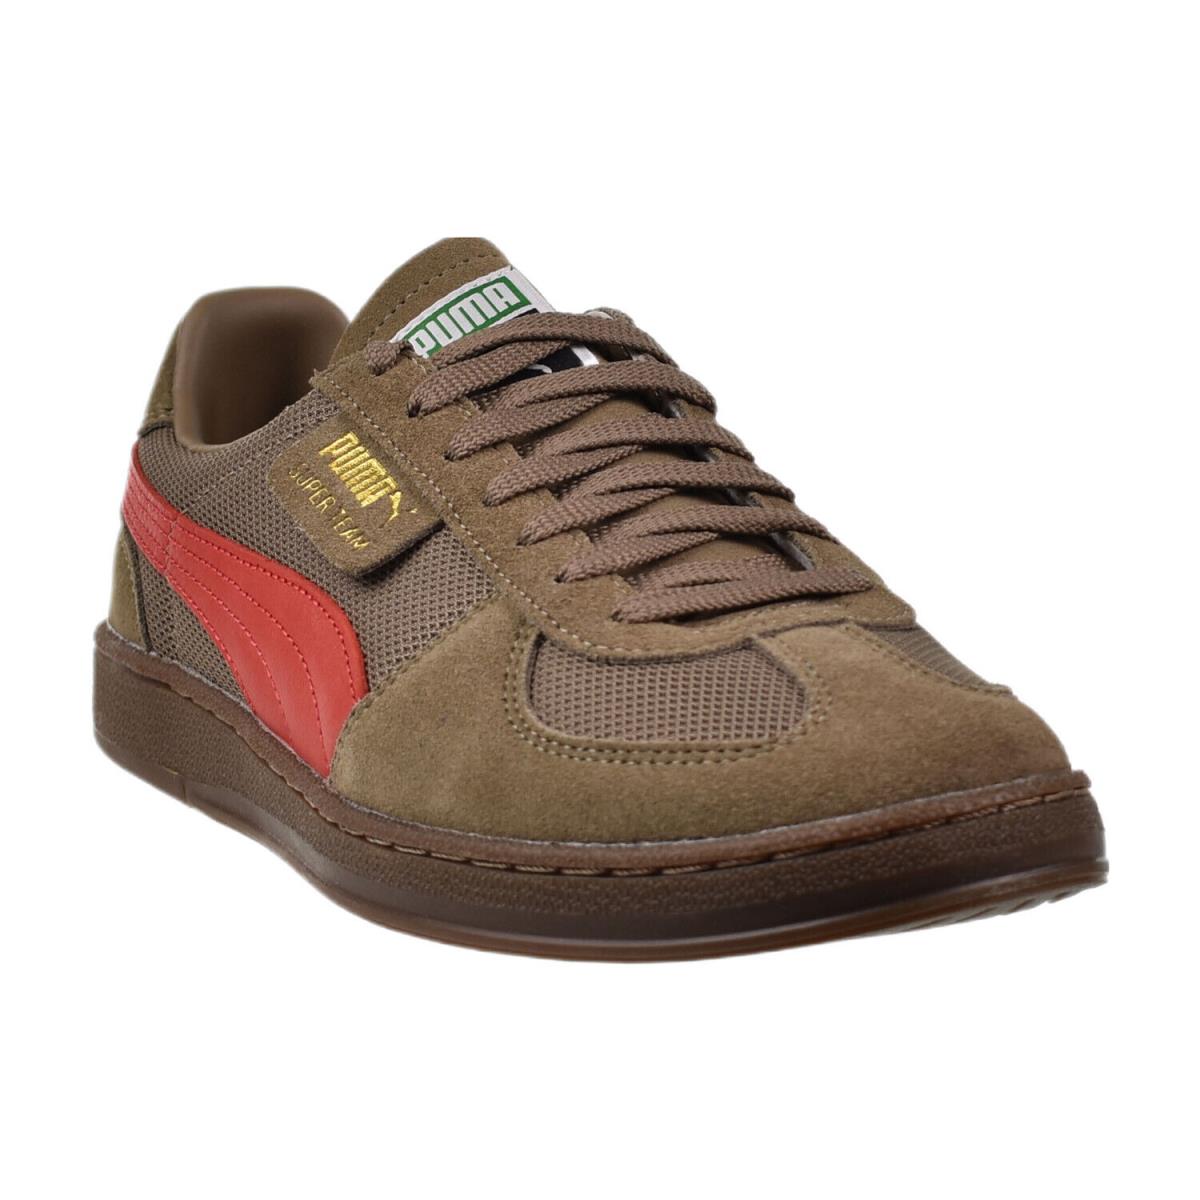 Puma Super Team OG Men`s Shoes Totally Taupe Red 390424-06 - Totally Taupe Red